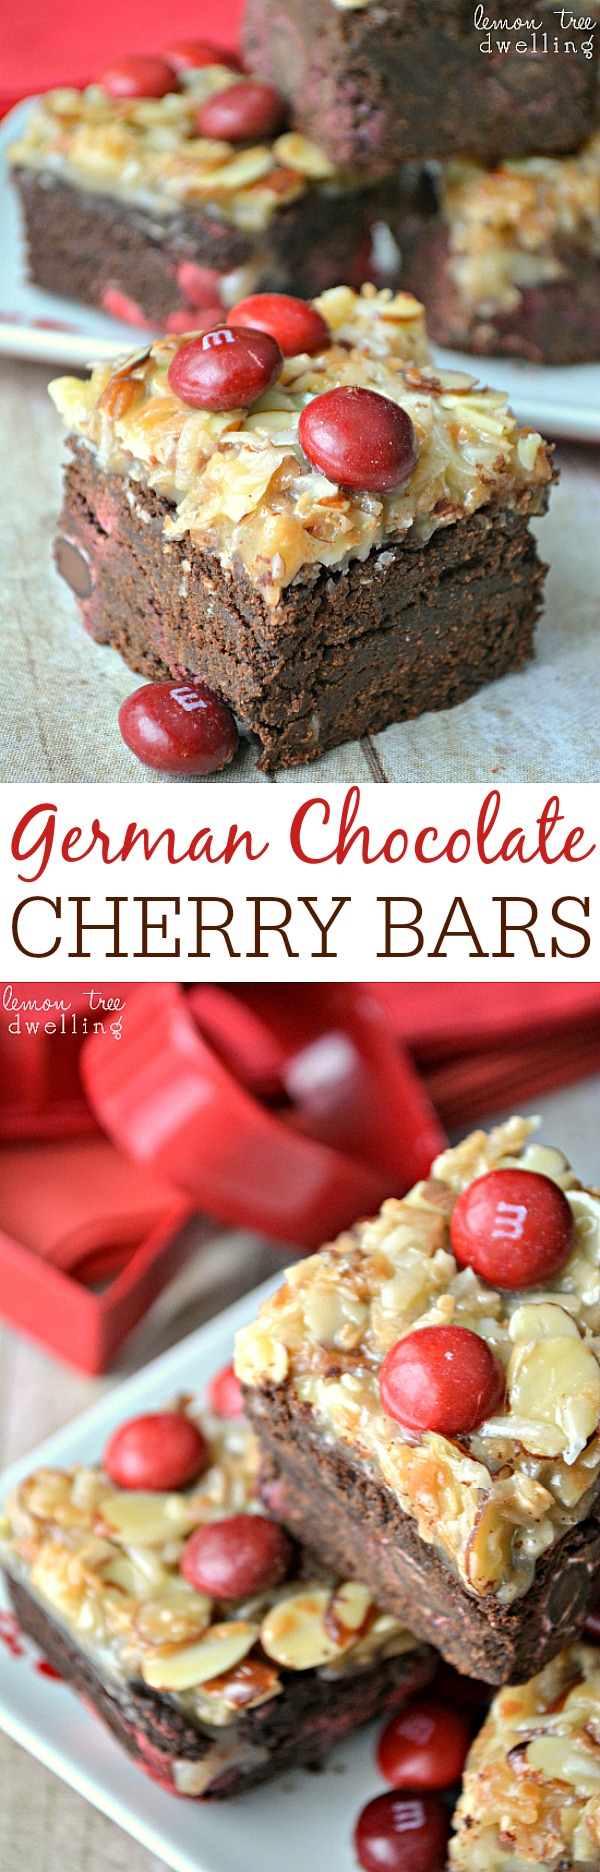 Recipes - German Chocolate Cherry Bars... These are AMAZING!!!  lemontreedwelling.com 